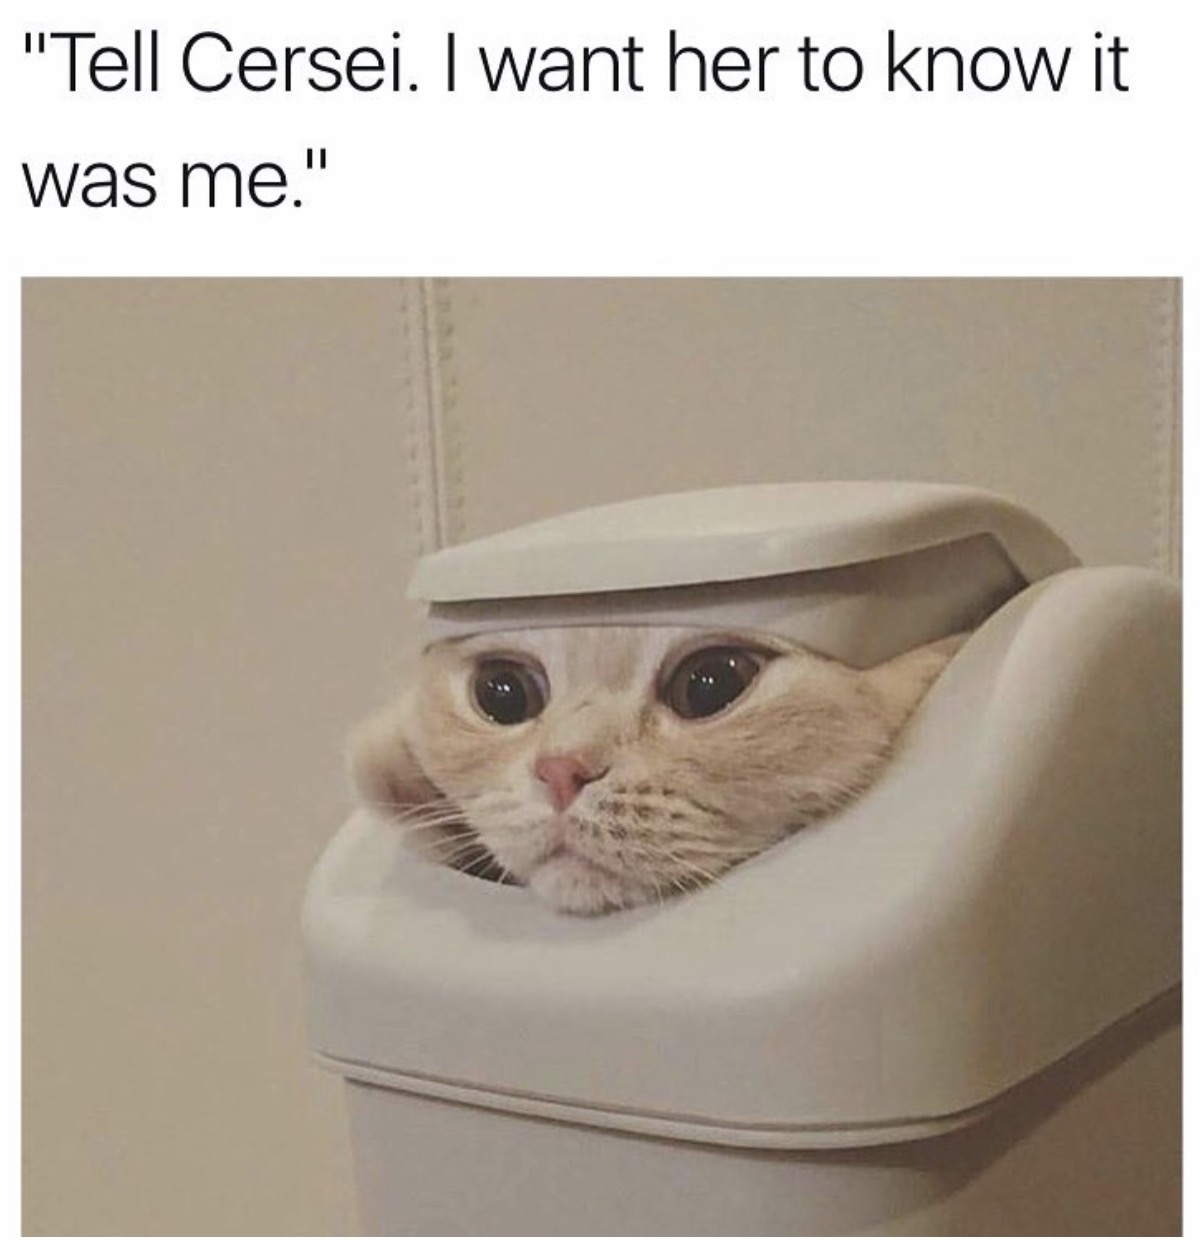 memes - tell cersei i want her to know - "Tell Cersei. I want her to know it was me."